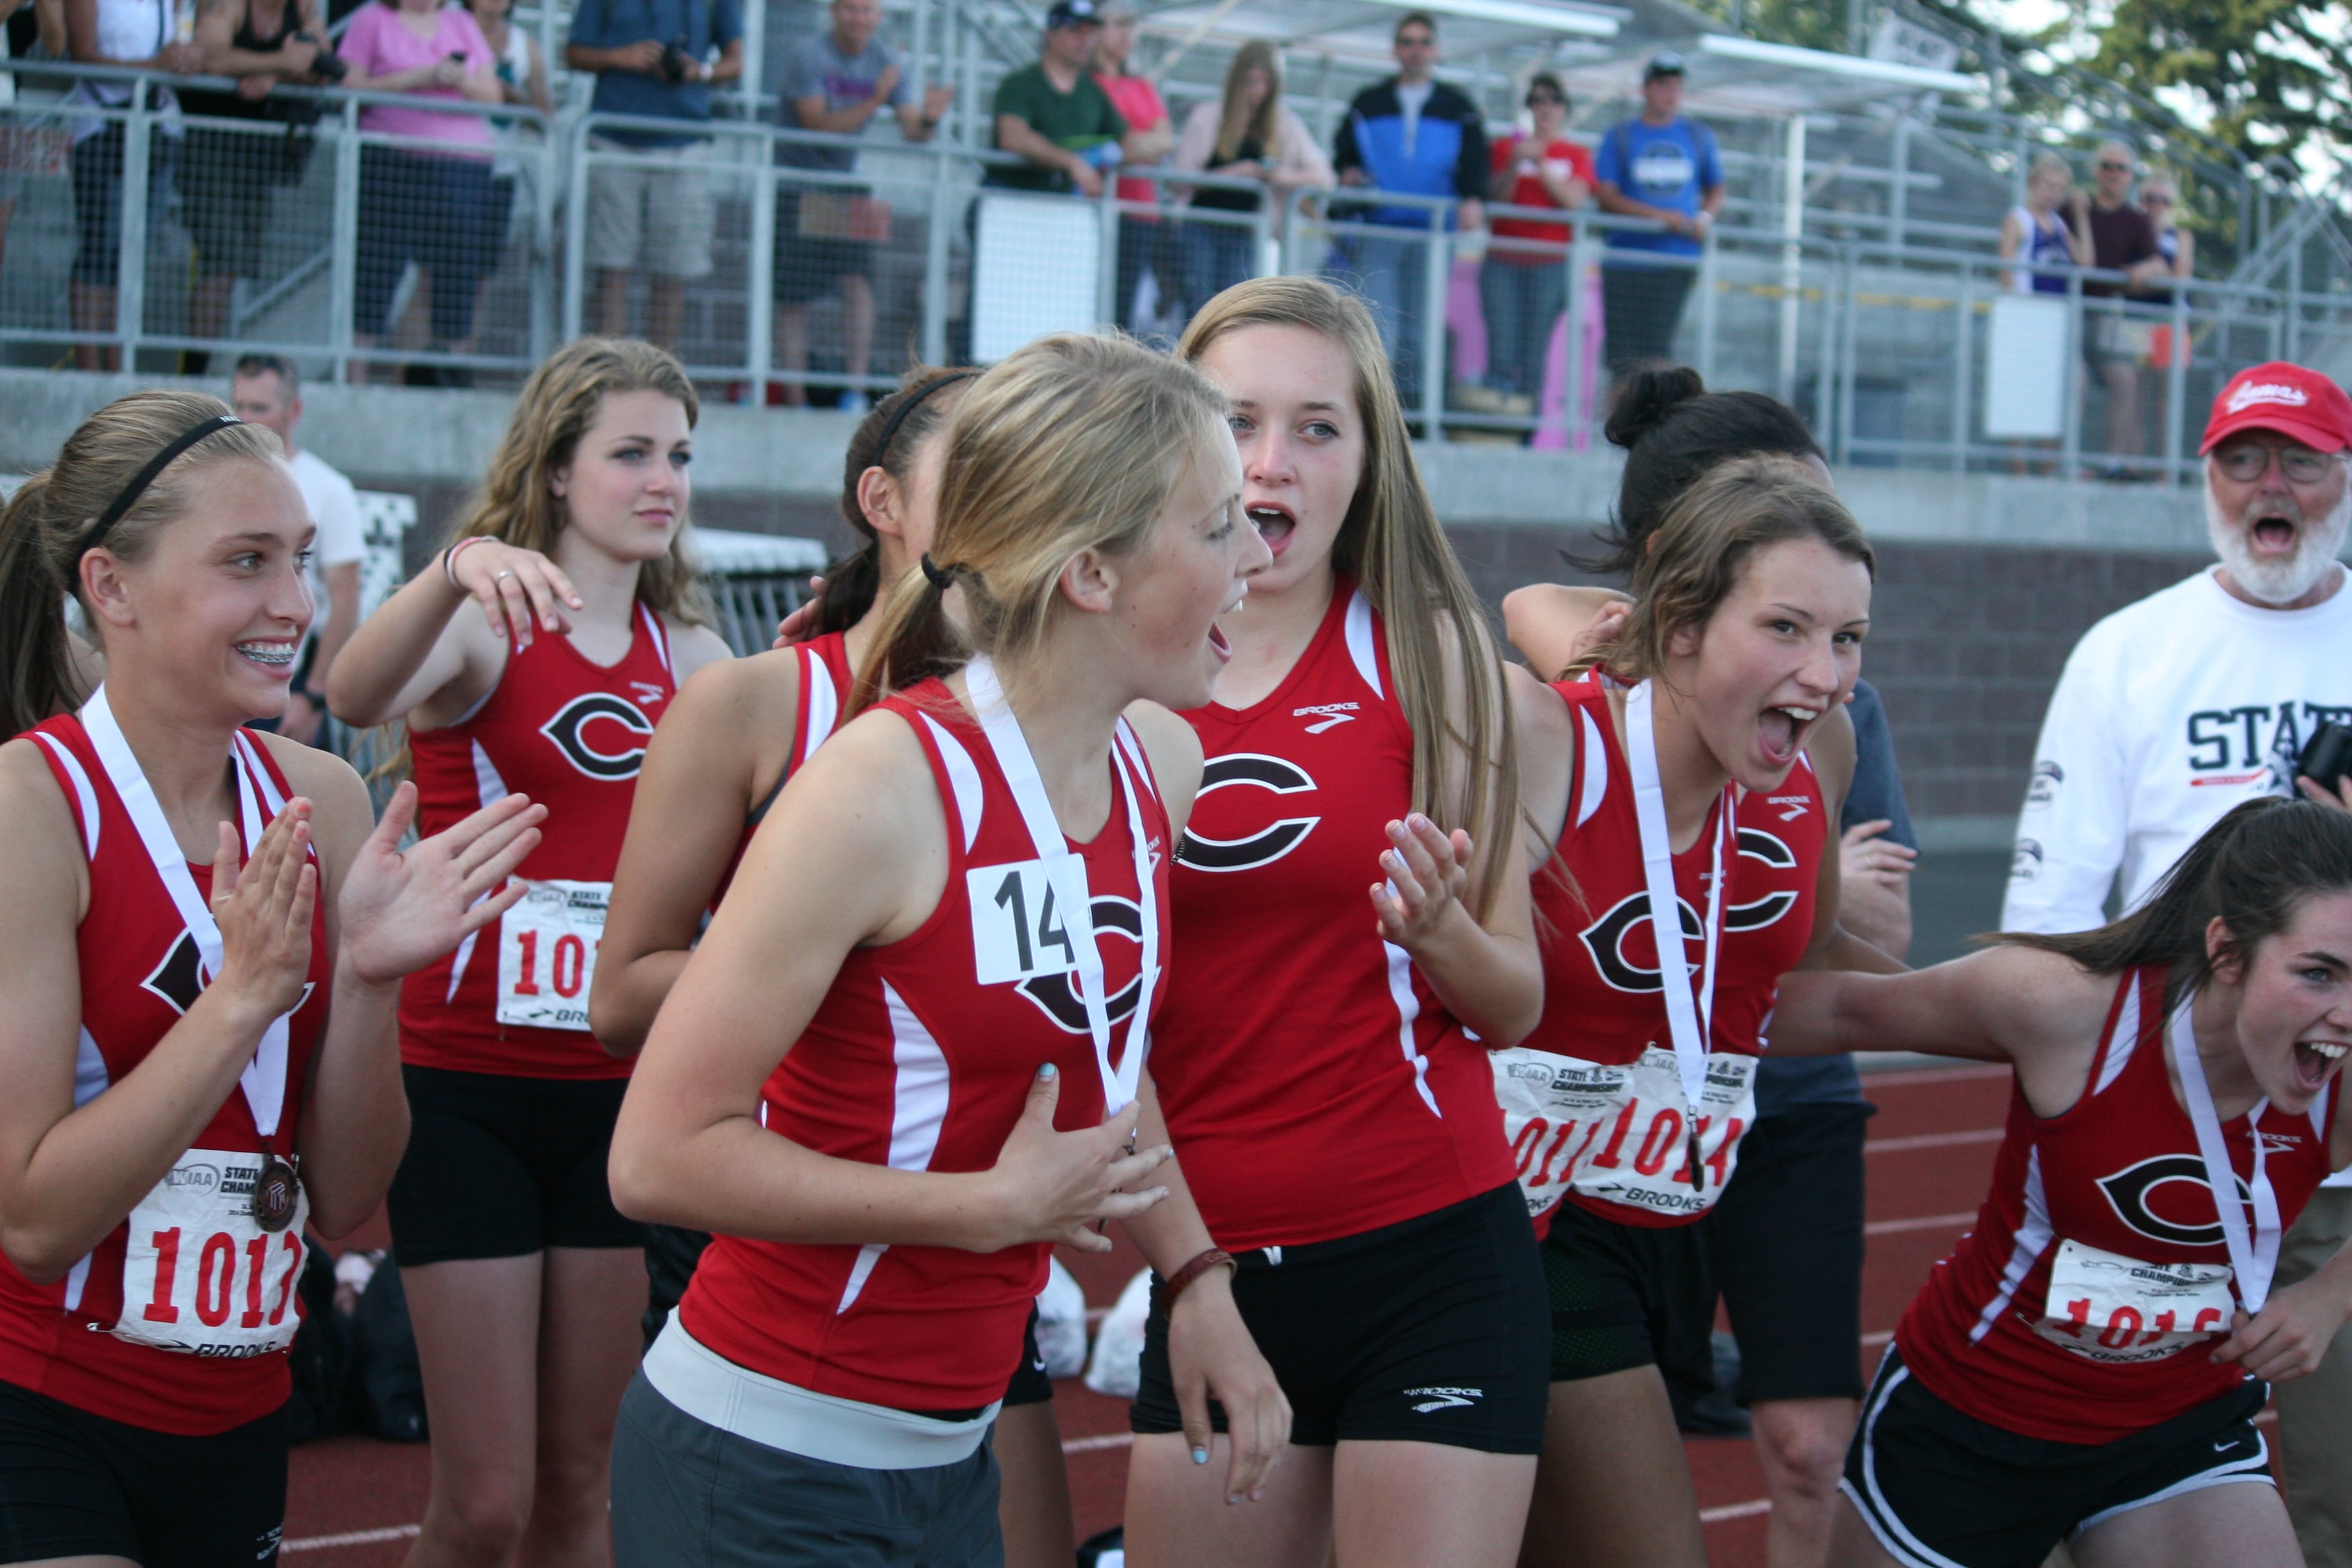 The Camas girls celebrate after being announced as the second place team at state.